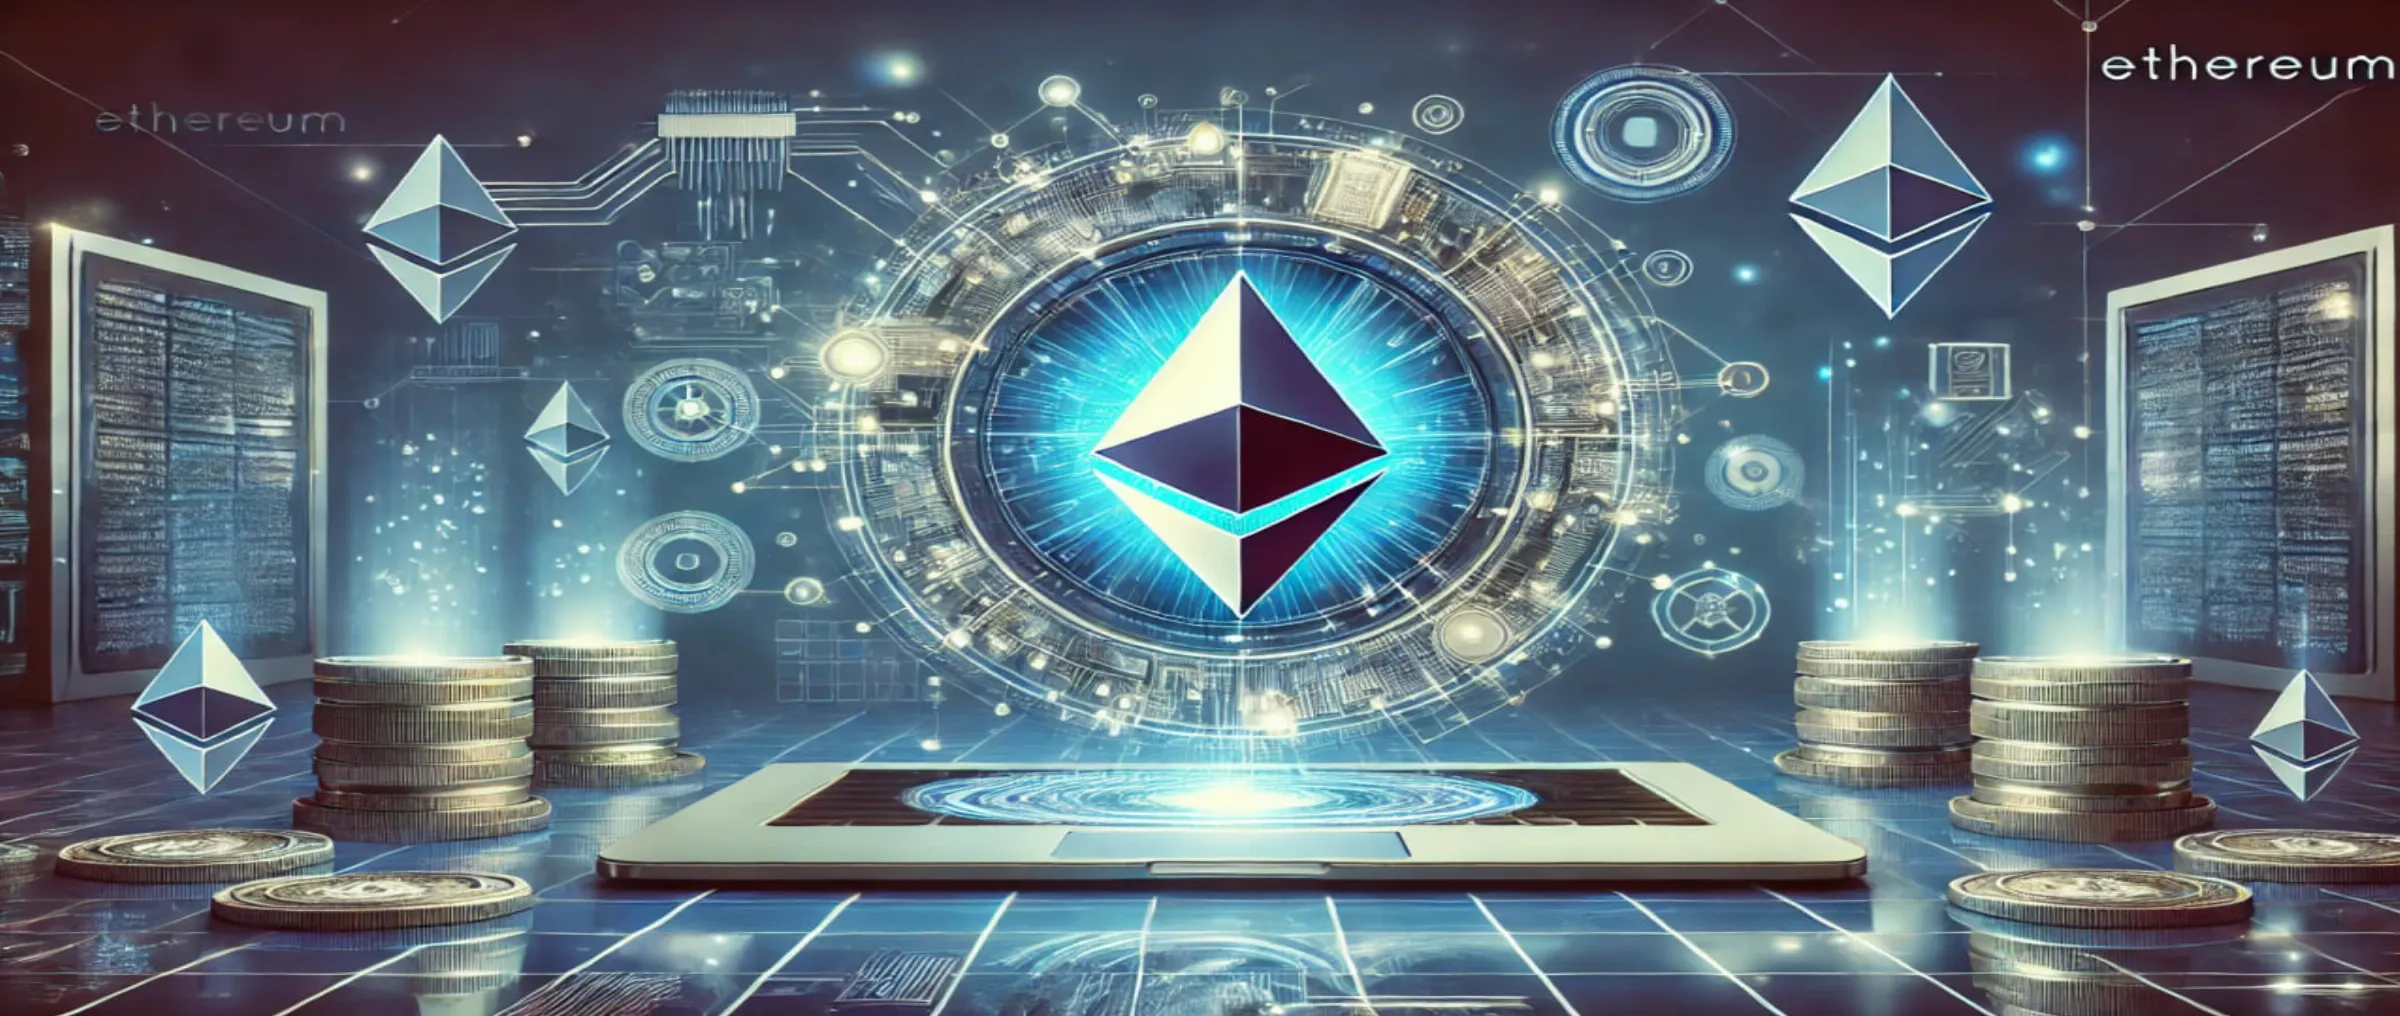 Three compelling reasons to buy Ethereum according to investors